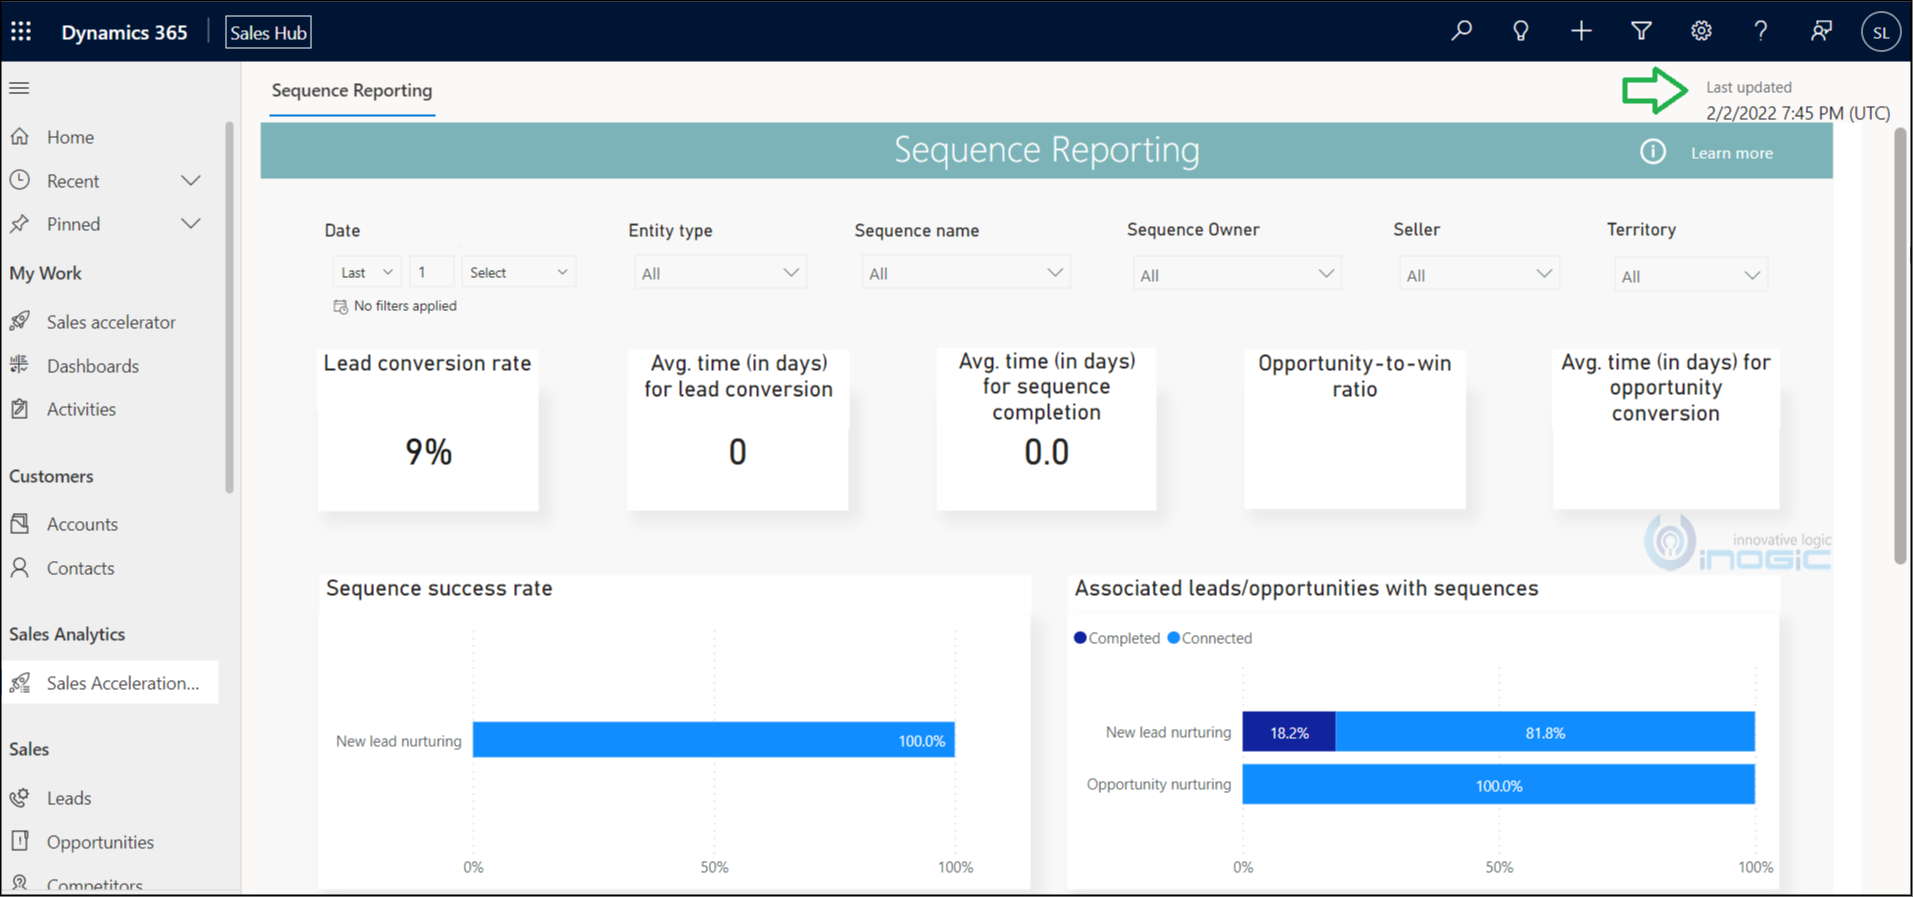 Configuring Sales Acceleration reporting